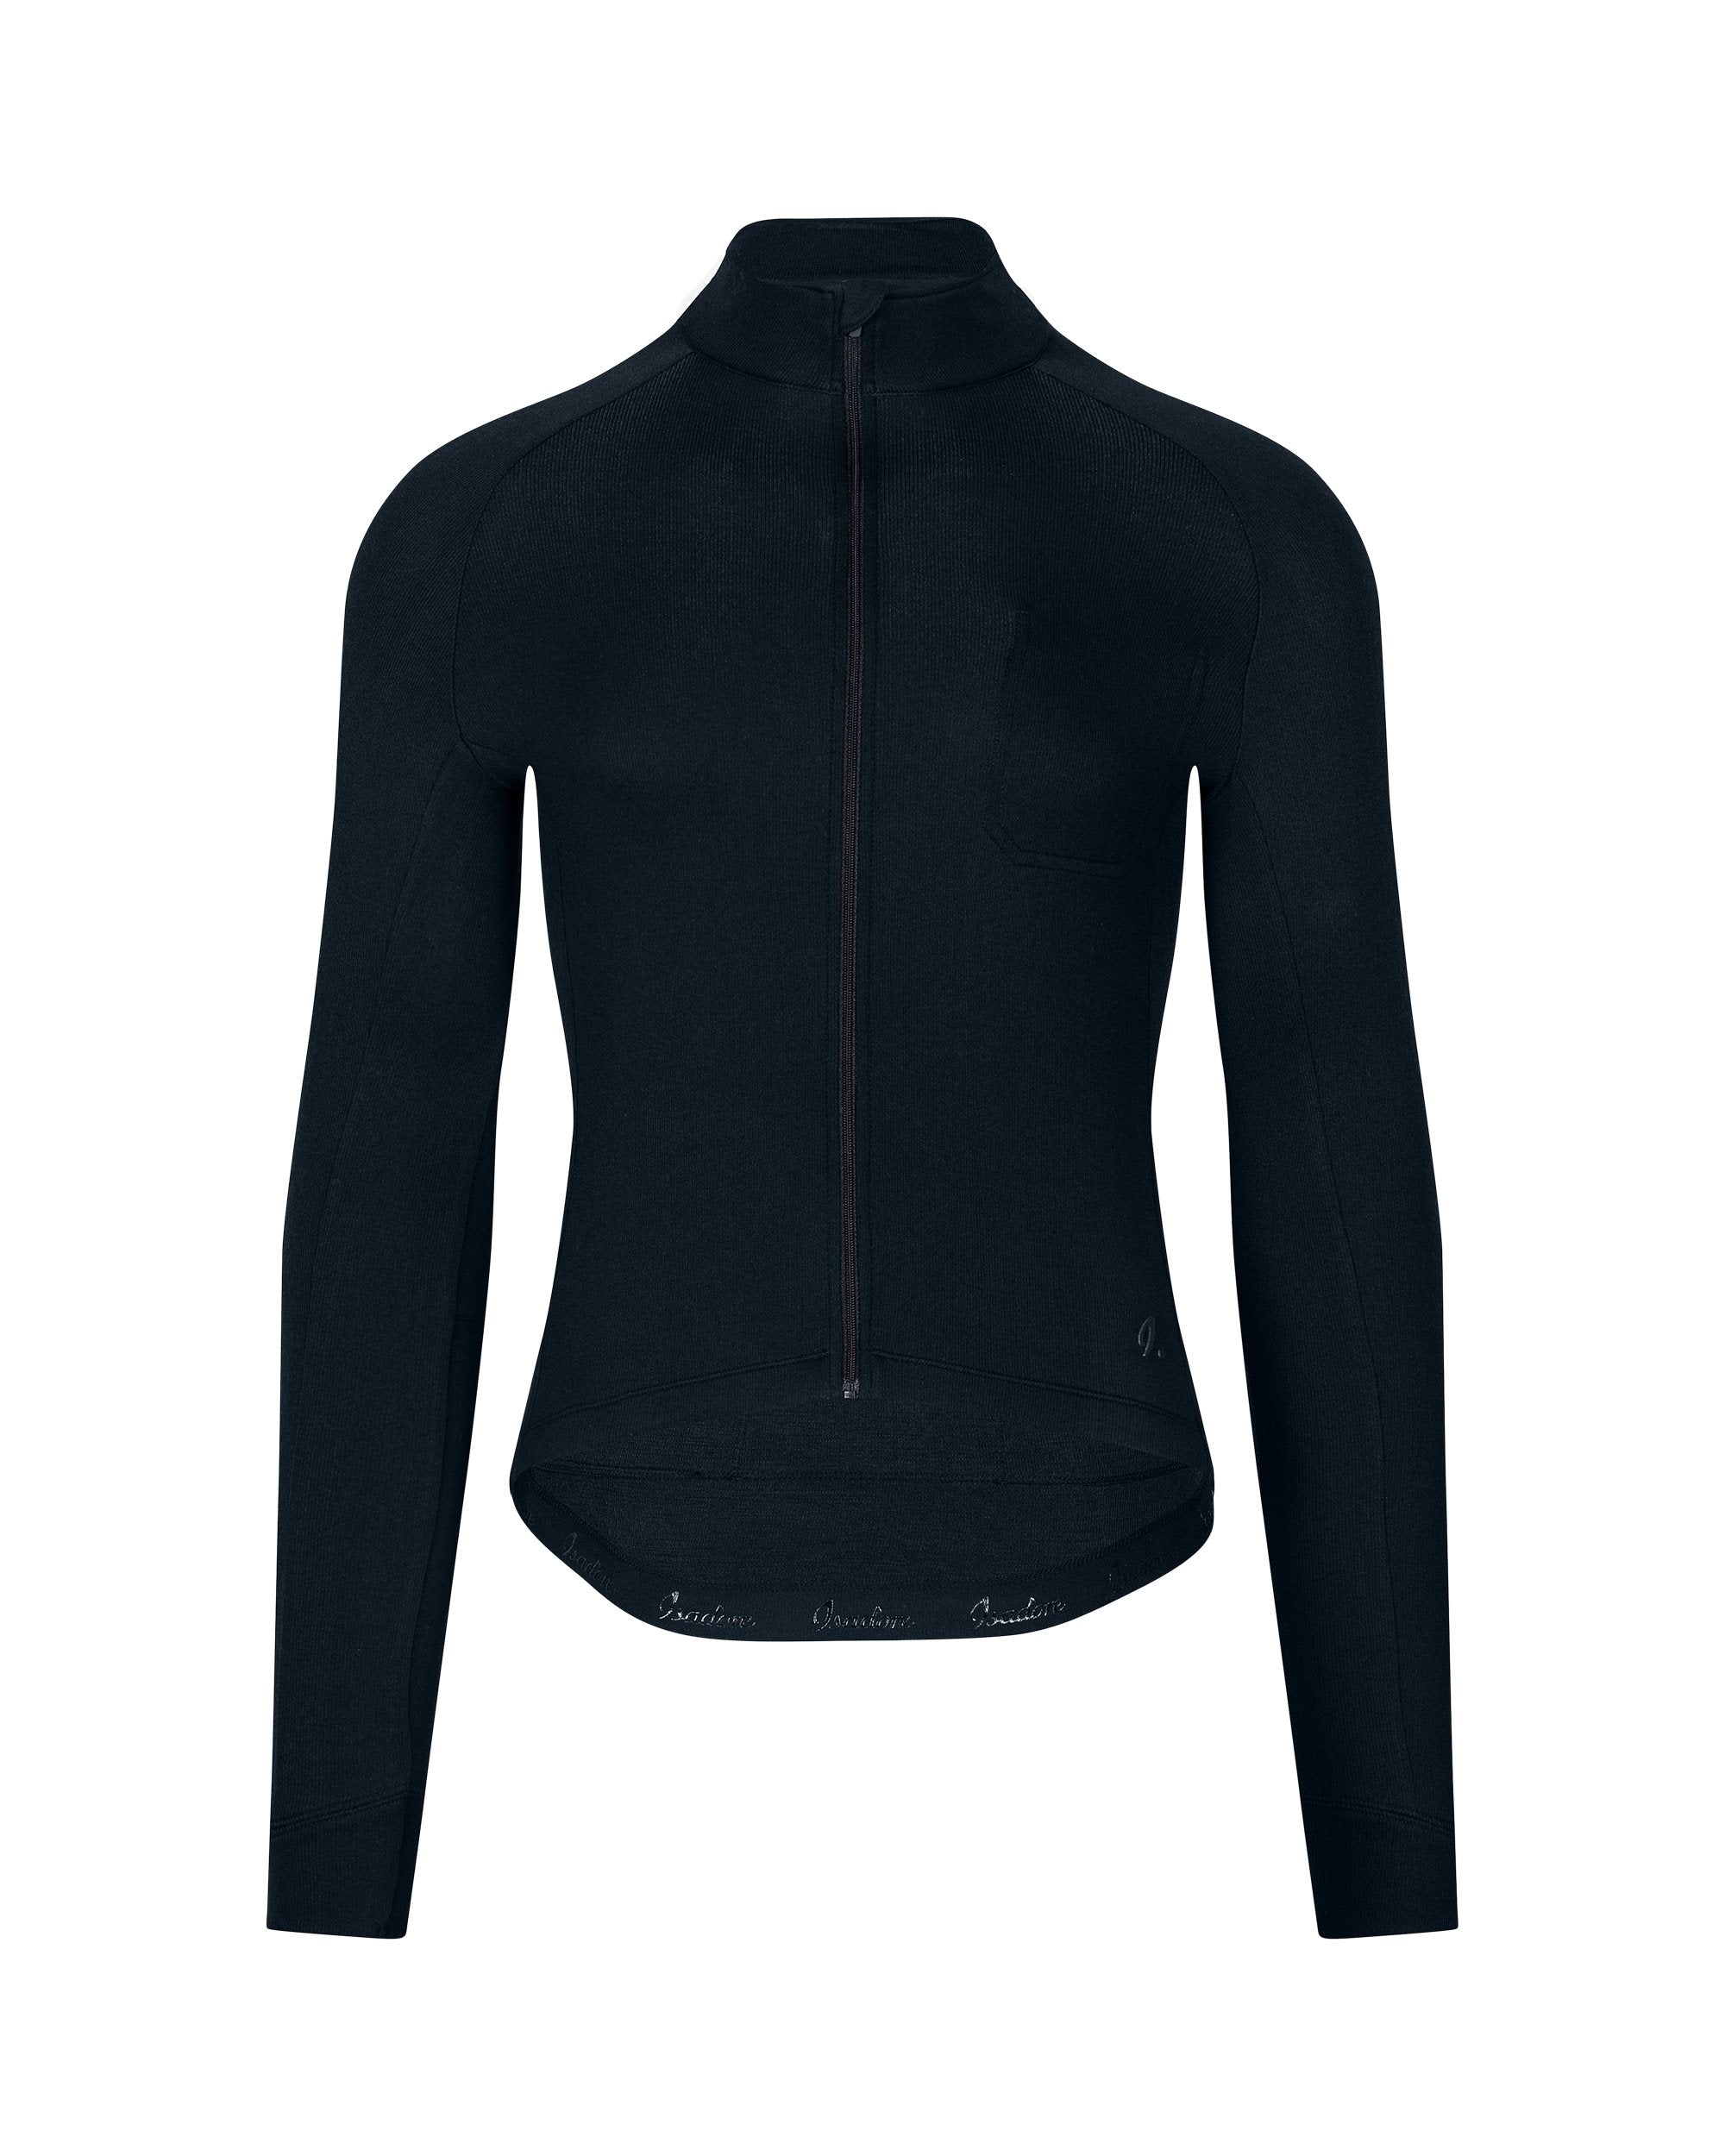 Signature Thermal Long Sleeve Jersey